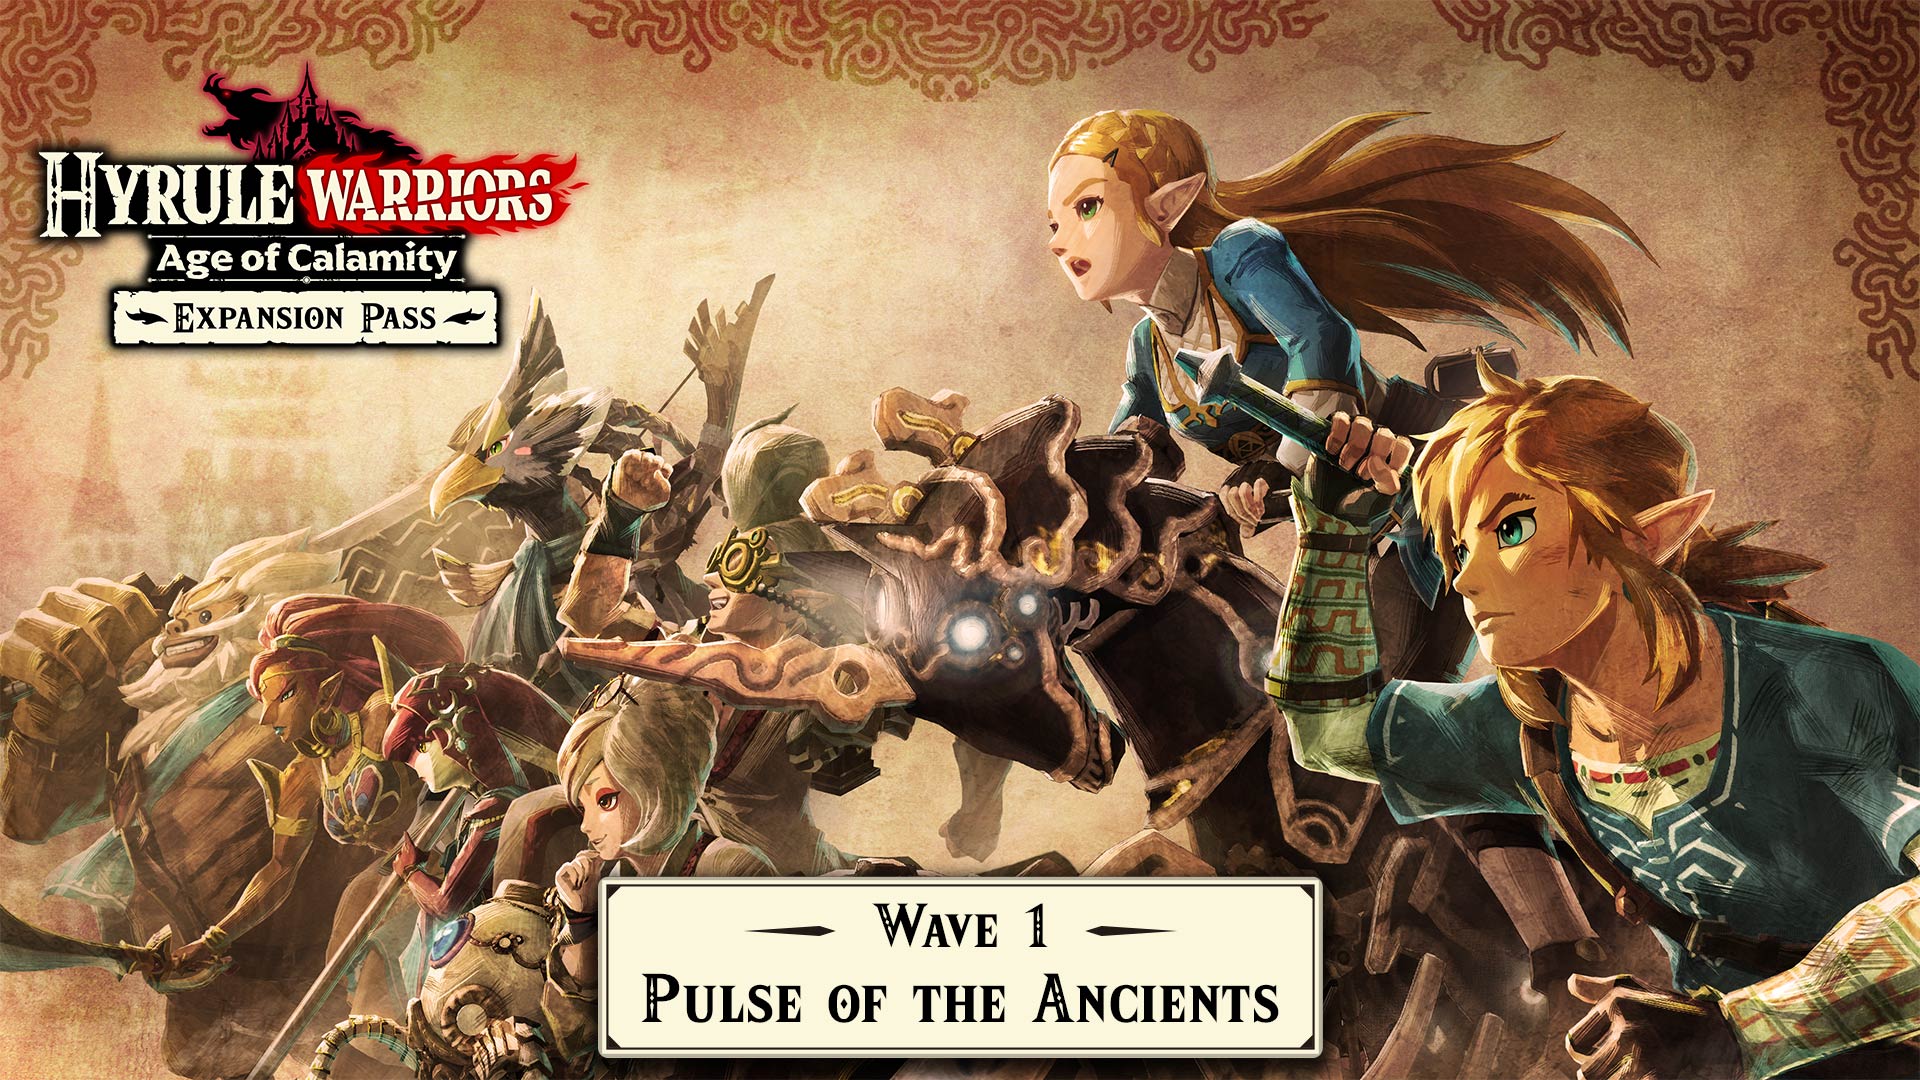 Pulse of the Ancients